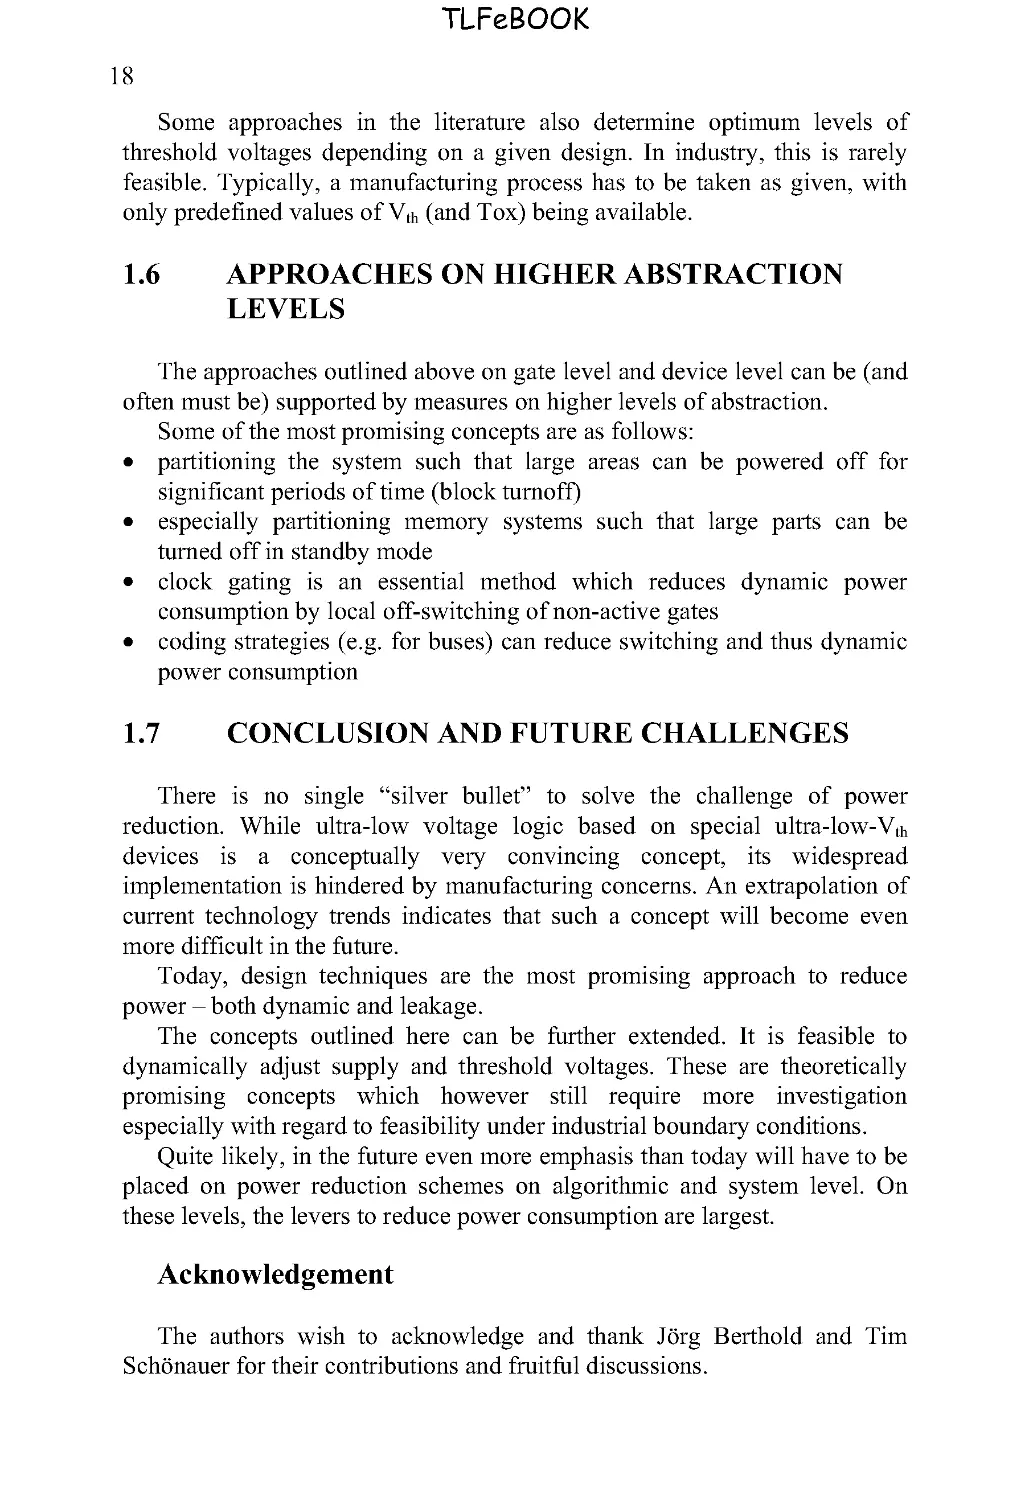 1.6 APPROACHES ON HIGHER ABSTRACTION LEVELS
1.7 CONCLUSION AND FUTURE CHALLENGES
Acknowledgement